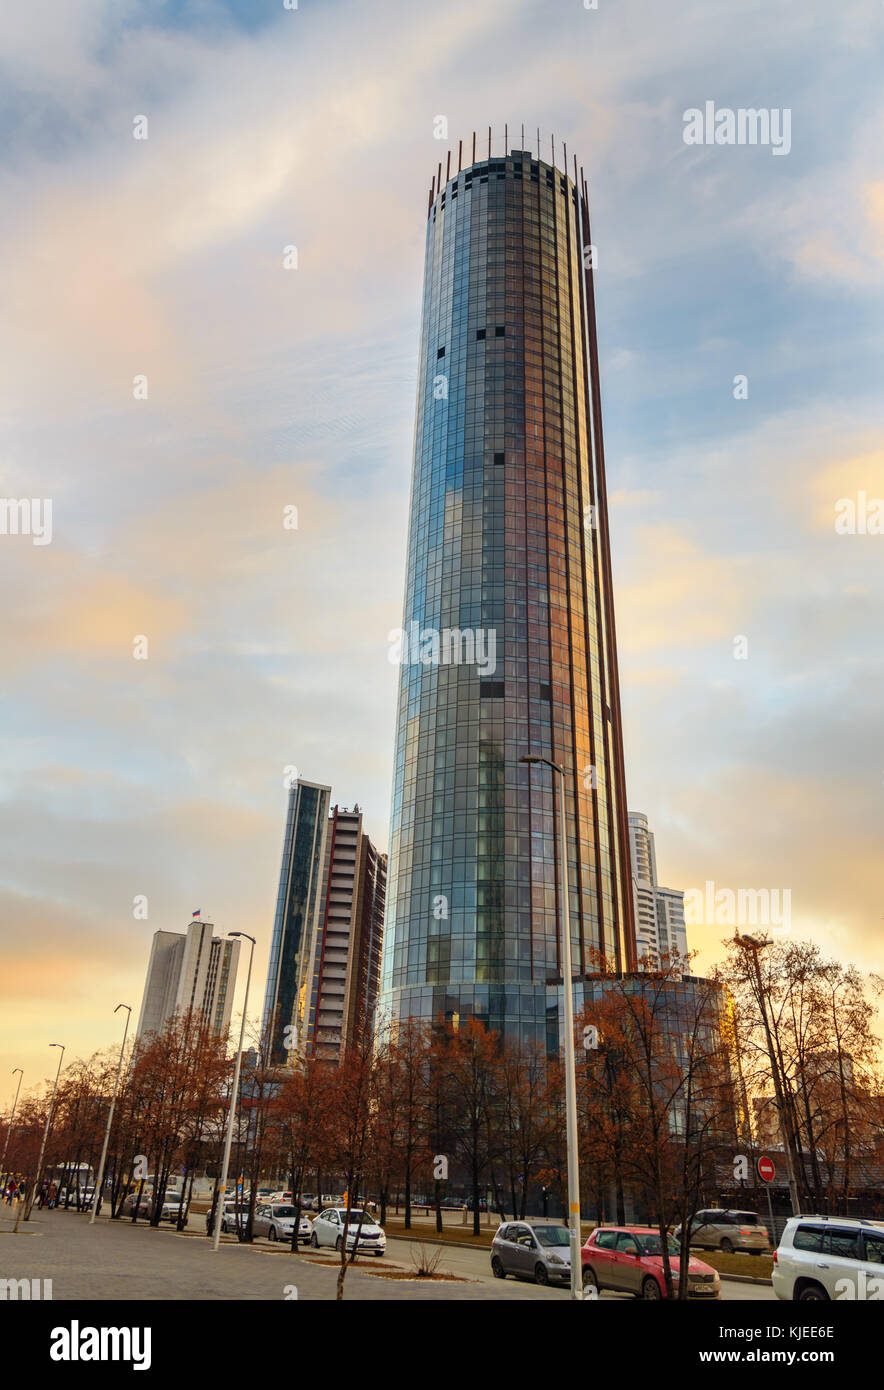 Yekaterinburg, Russia - 11 November, 2017: View of Iset tower on sunset. It is 52-story skyscraper in commercial district Yekaterinburg-City Stock Photo